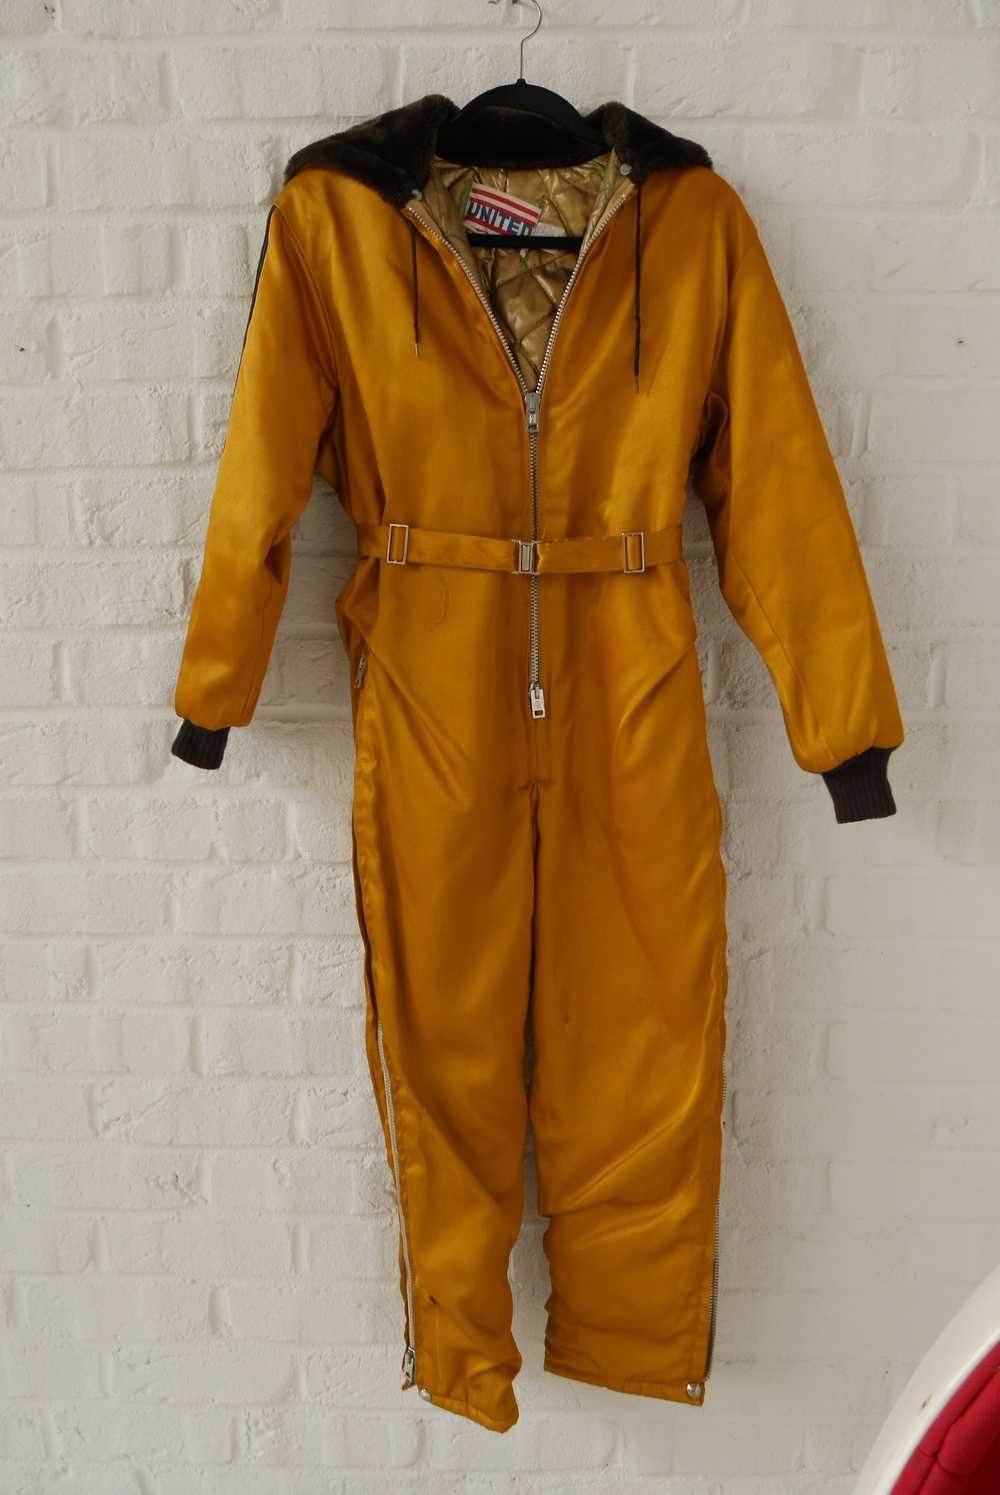 United Ski suit insulated 1950s Vintage hooded sk… - image 1